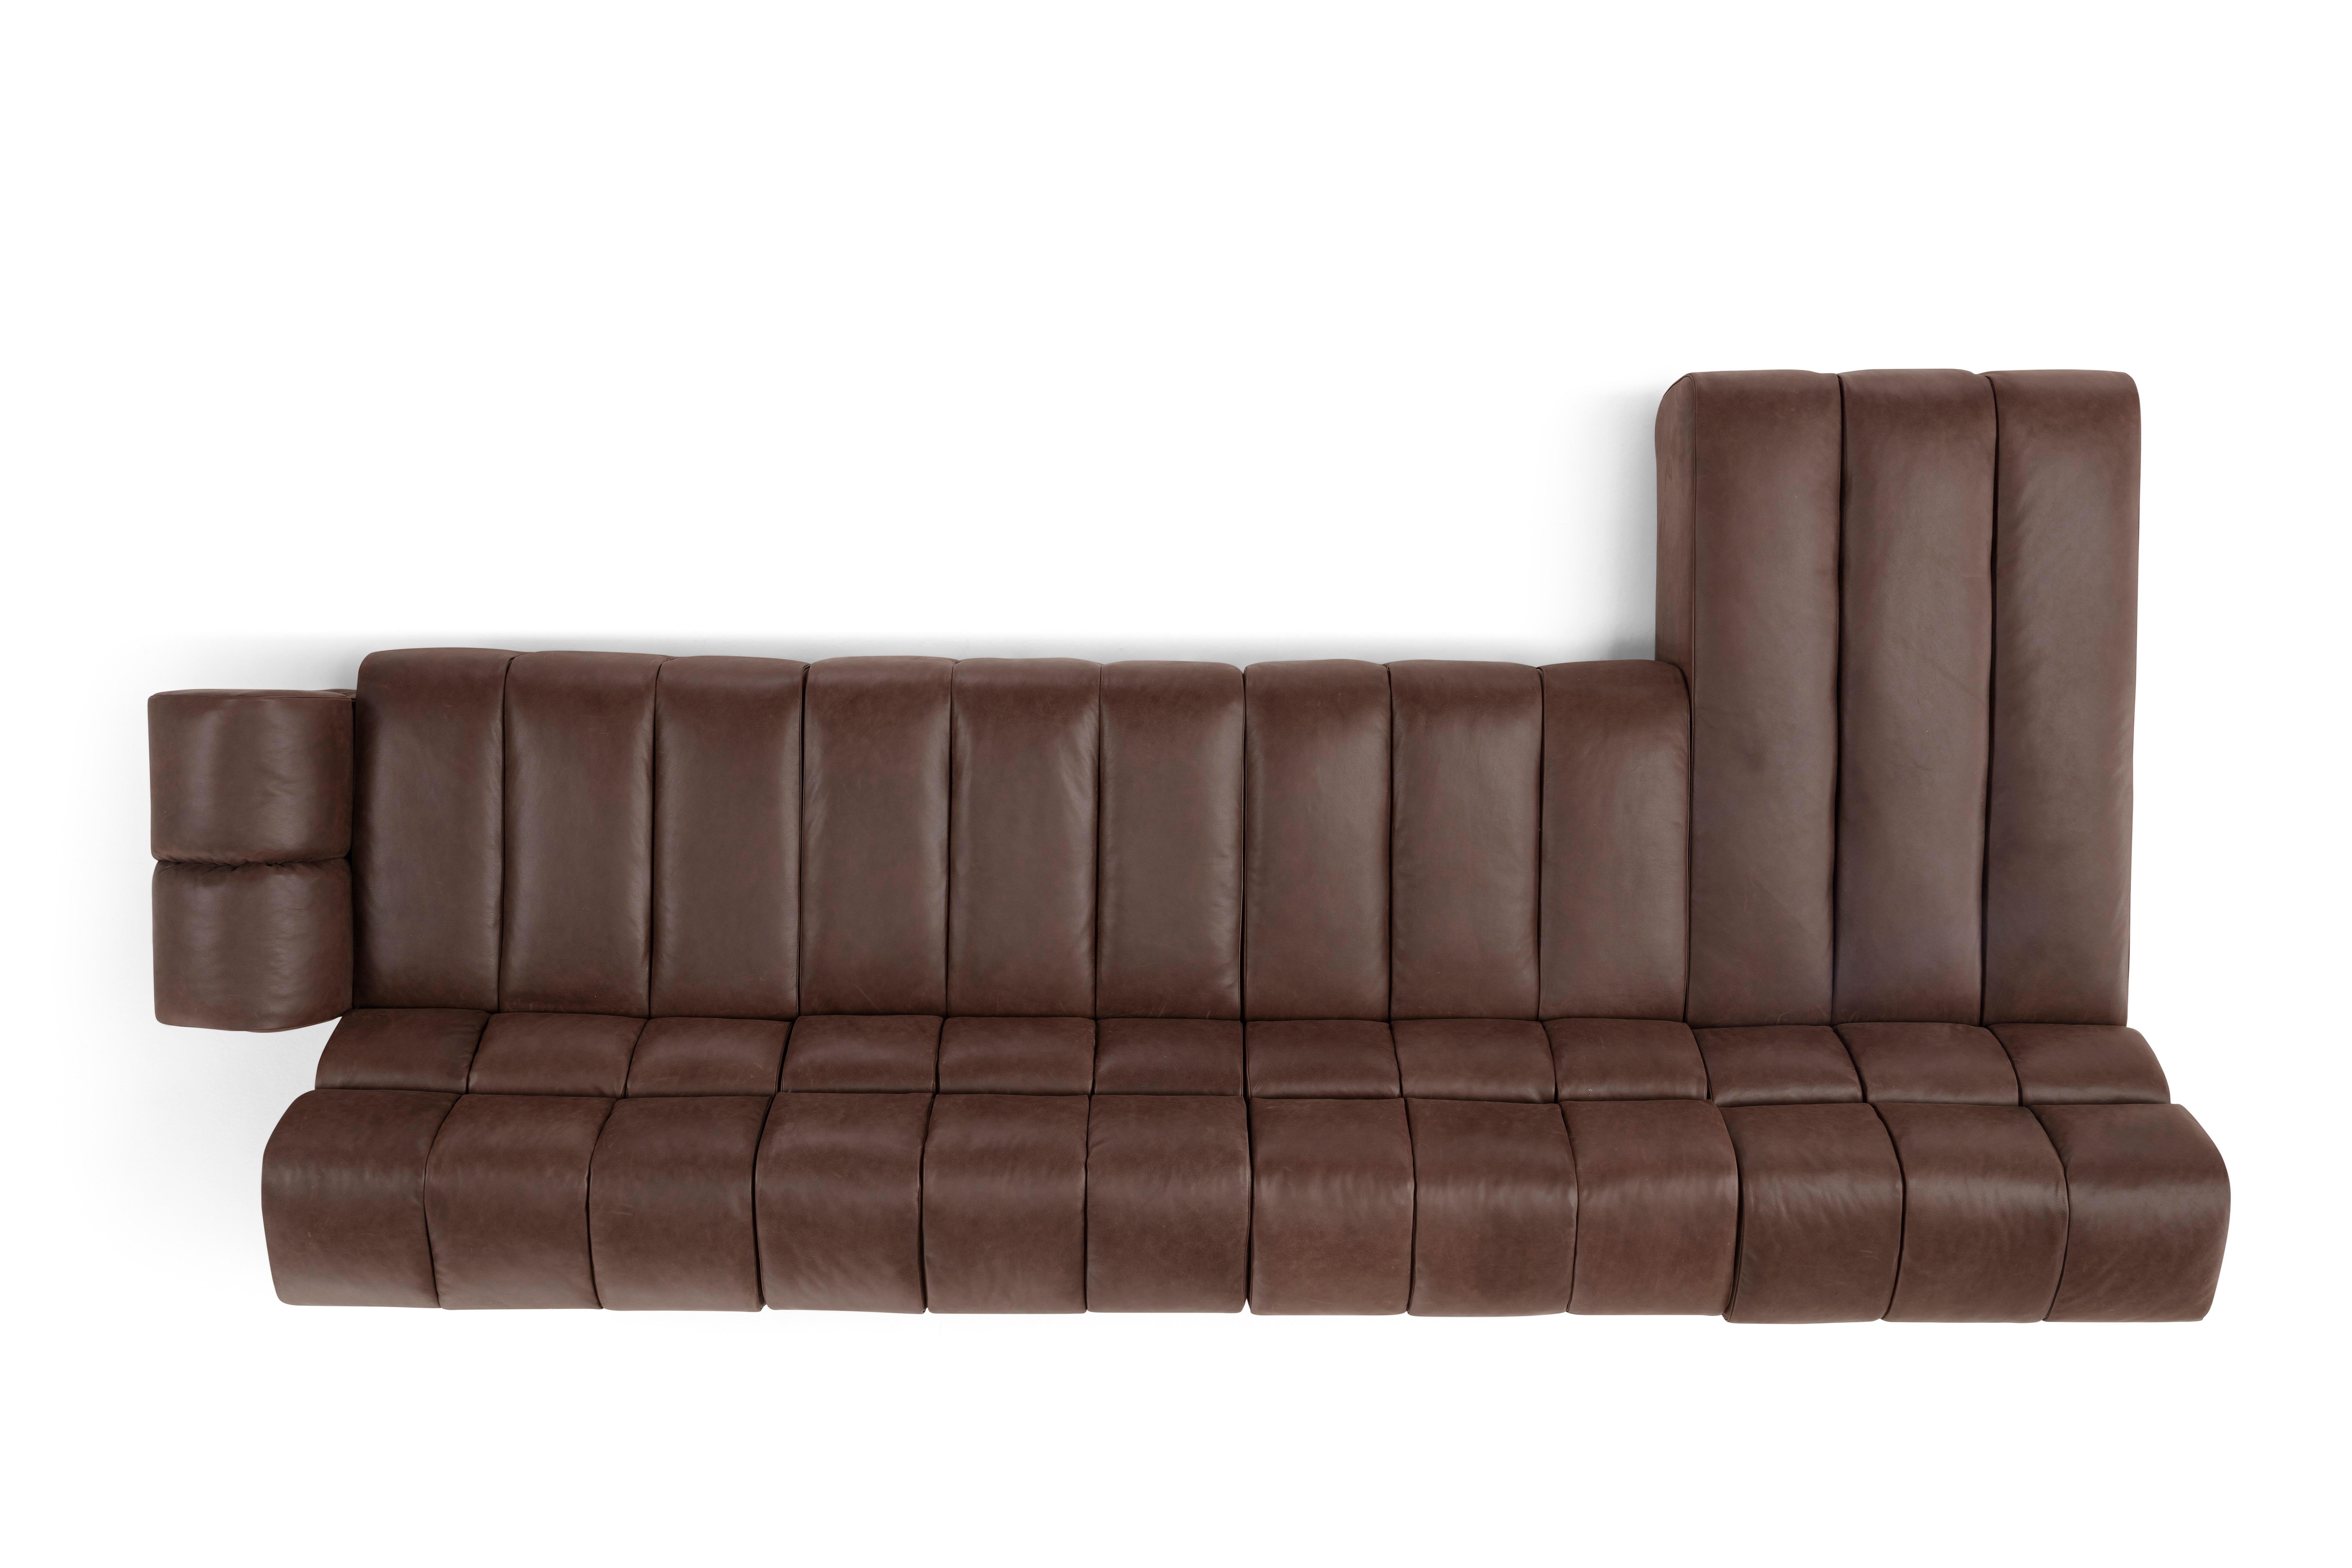 Sectional sofa PALMO by Amura Lab 
Designer: Emanuel Gargano

Model shown: Textile - Leather Old Velvet 2064

Inspired by the natural gesture of an opening hand, Palmo is the new living concept designed by Emanuel Gargano.
The leather folds